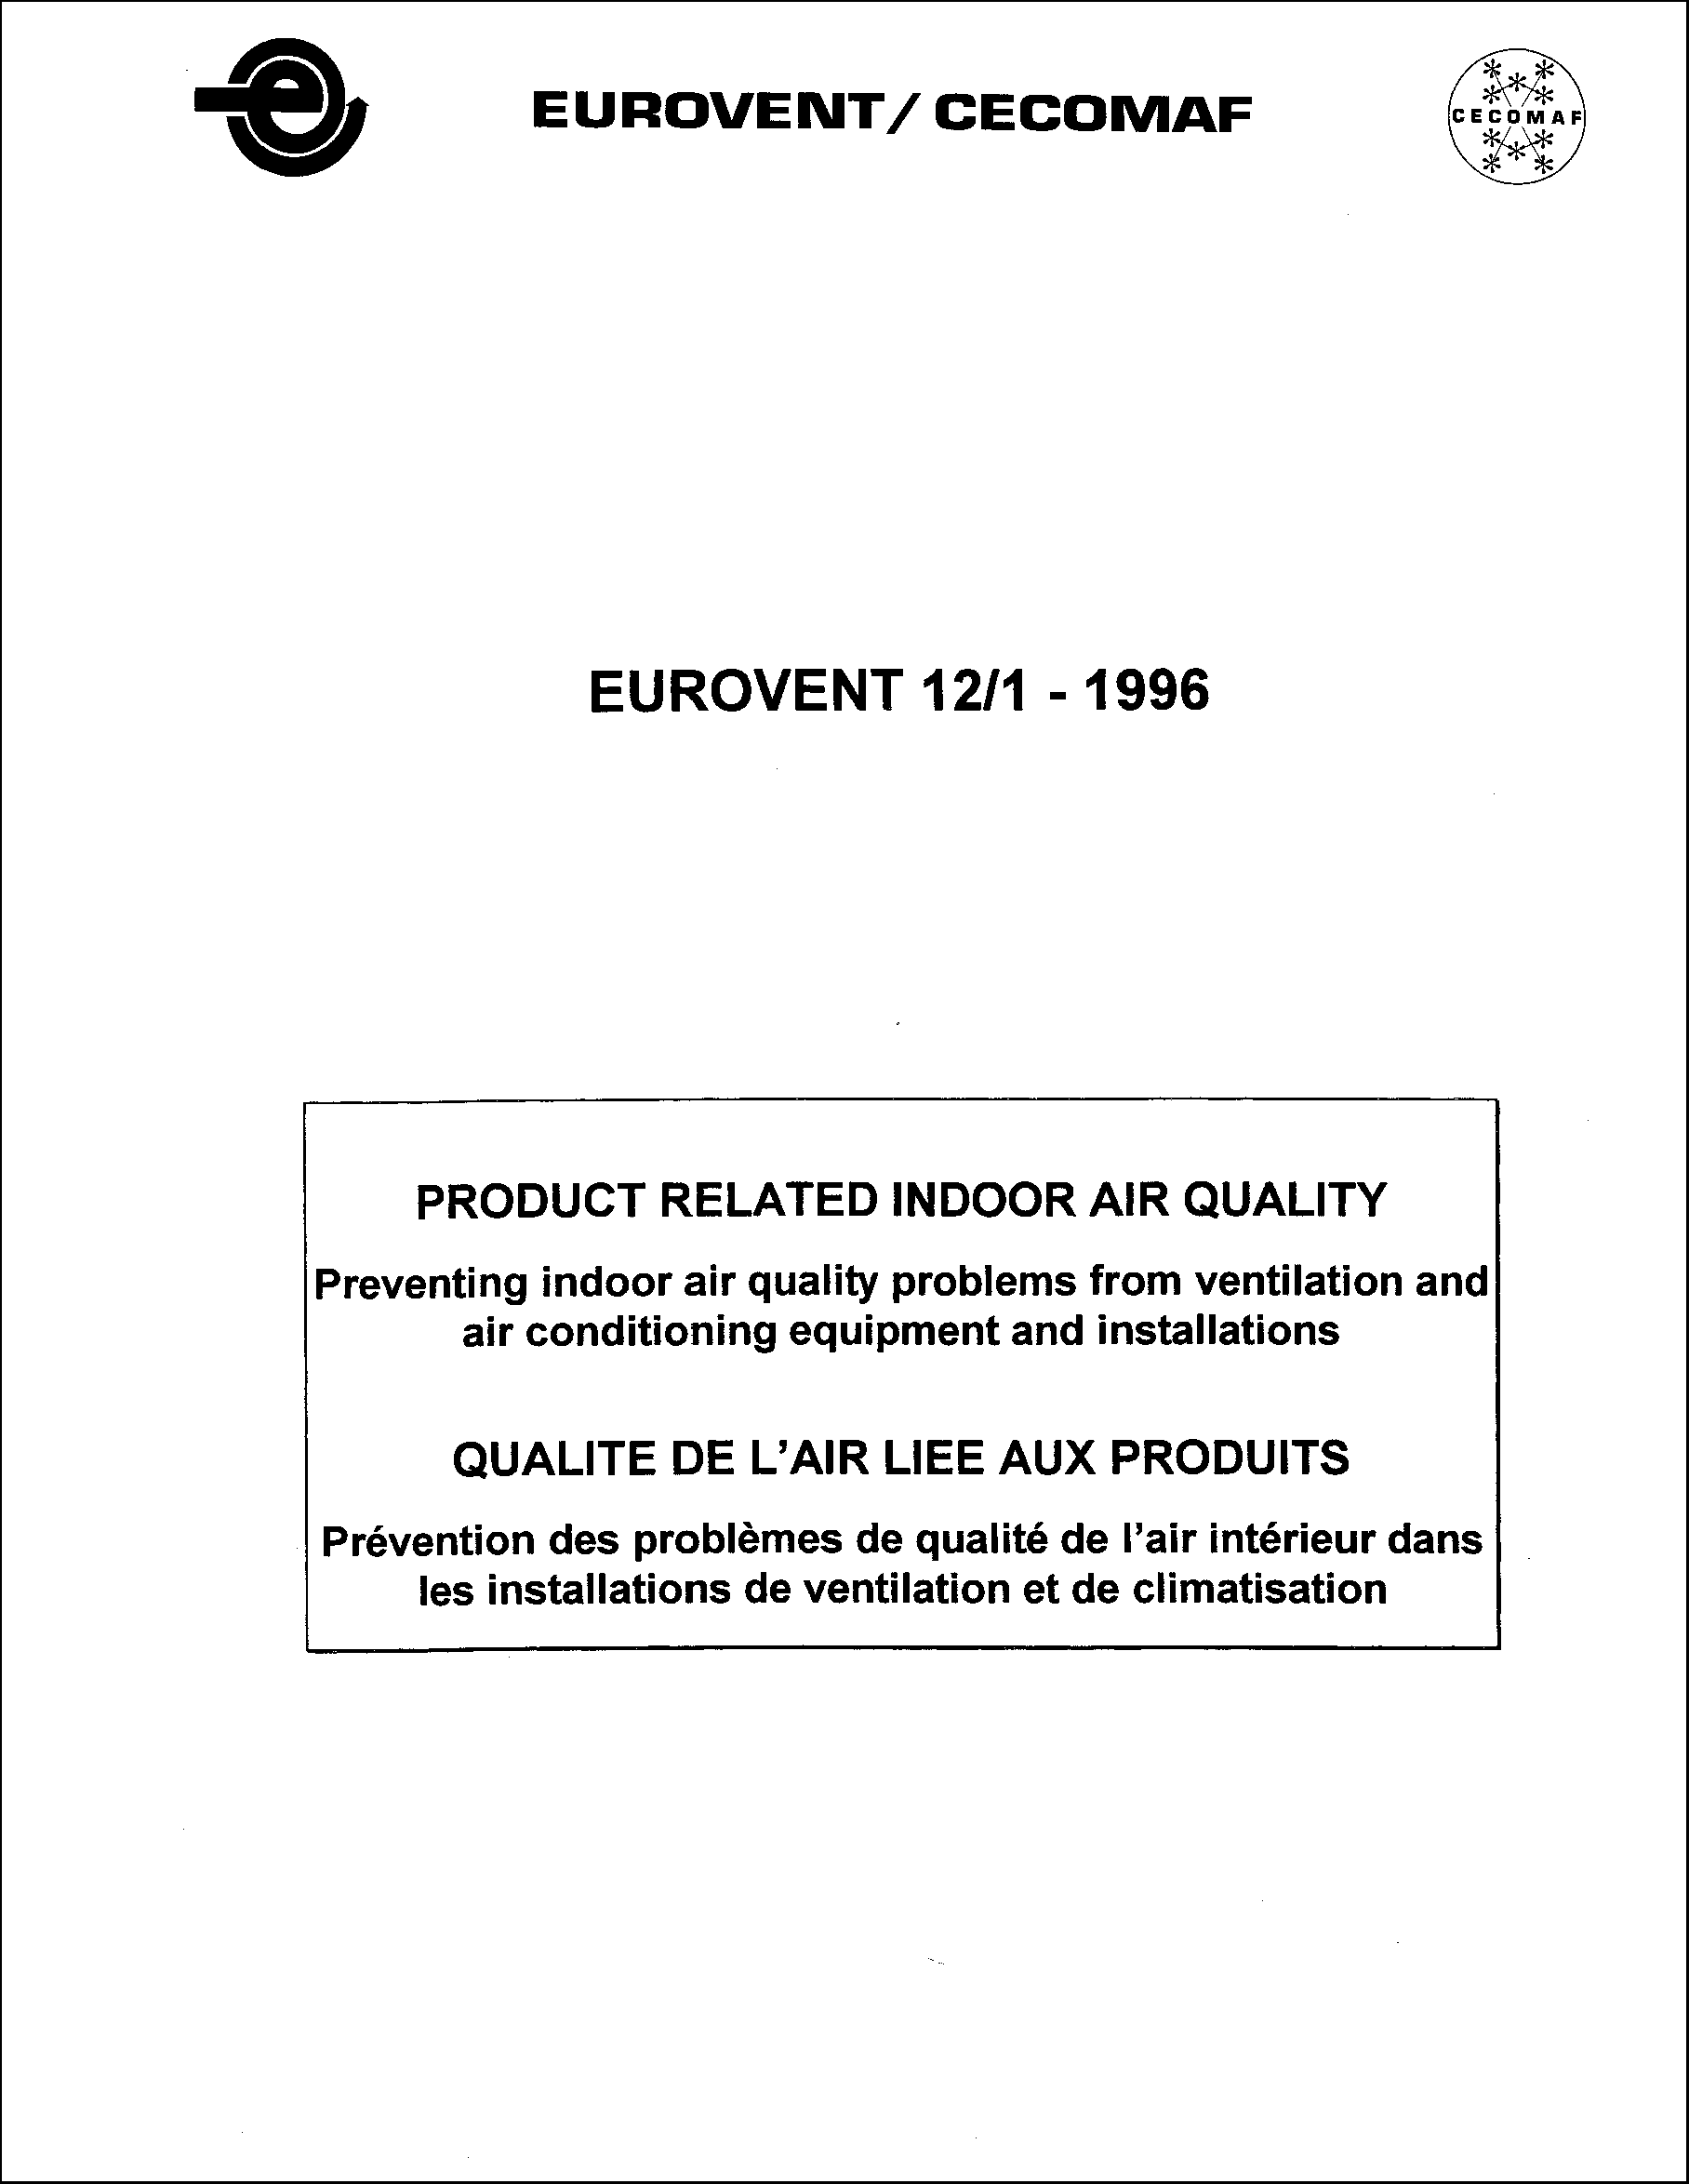 1996 - Product related indoor air quality